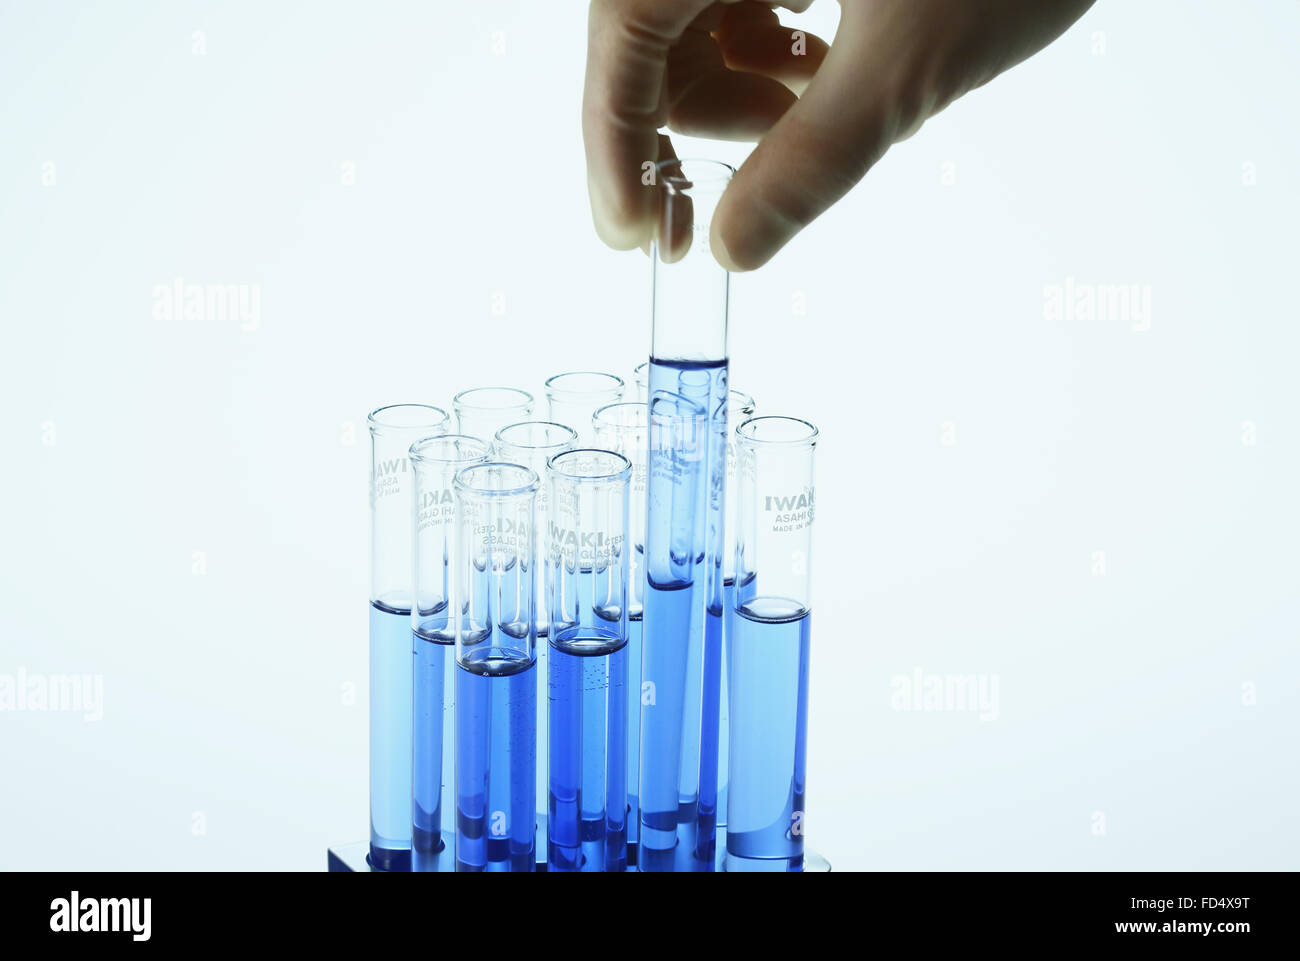 Scientist working in the lab Stock Photo